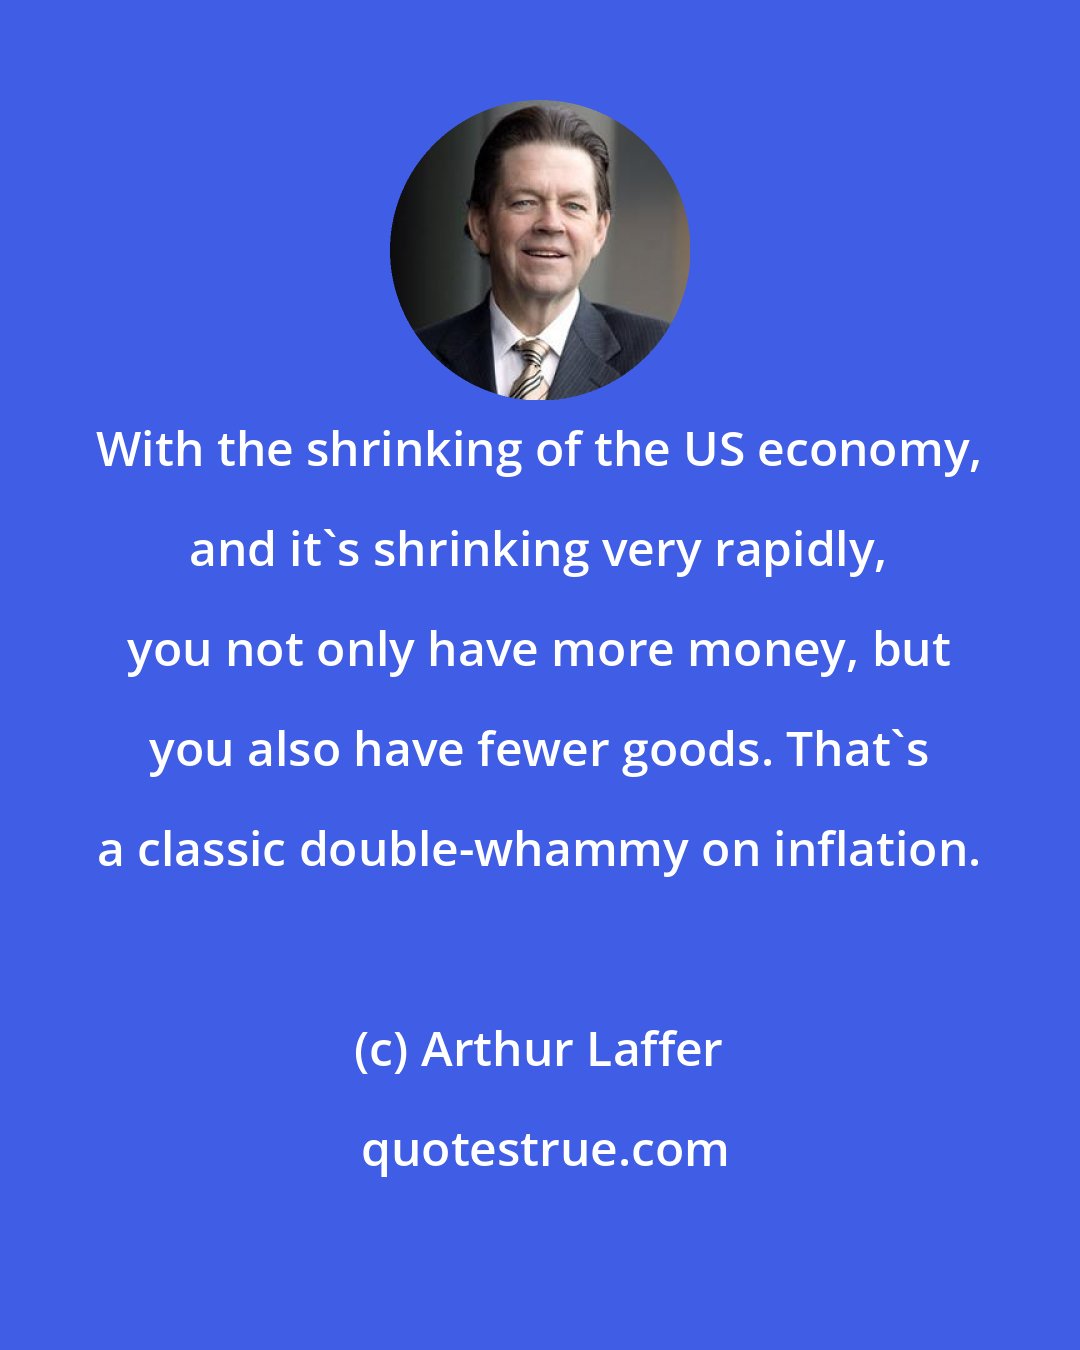 Arthur Laffer: With the shrinking of the US economy, and it's shrinking very rapidly, you not only have more money, but you also have fewer goods. That's a classic double-whammy on inflation.